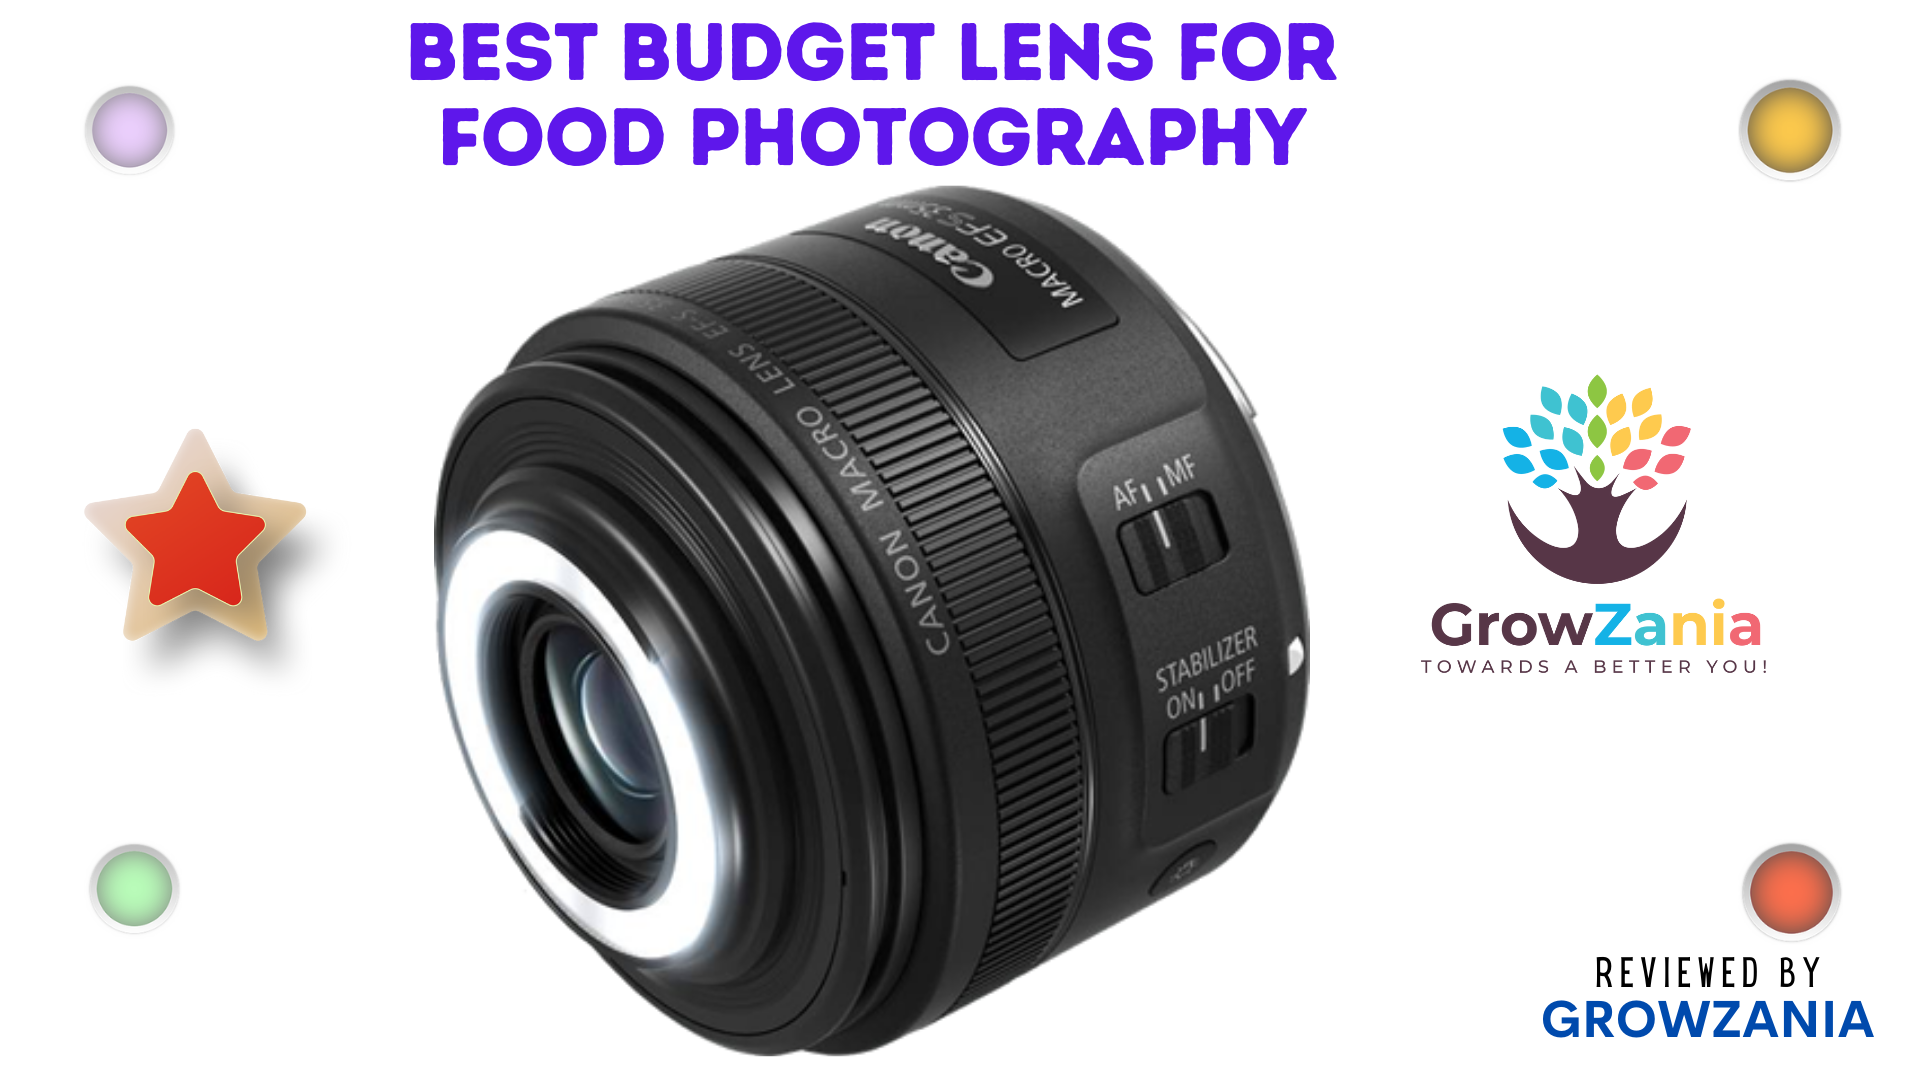 Best budget lens for food photography